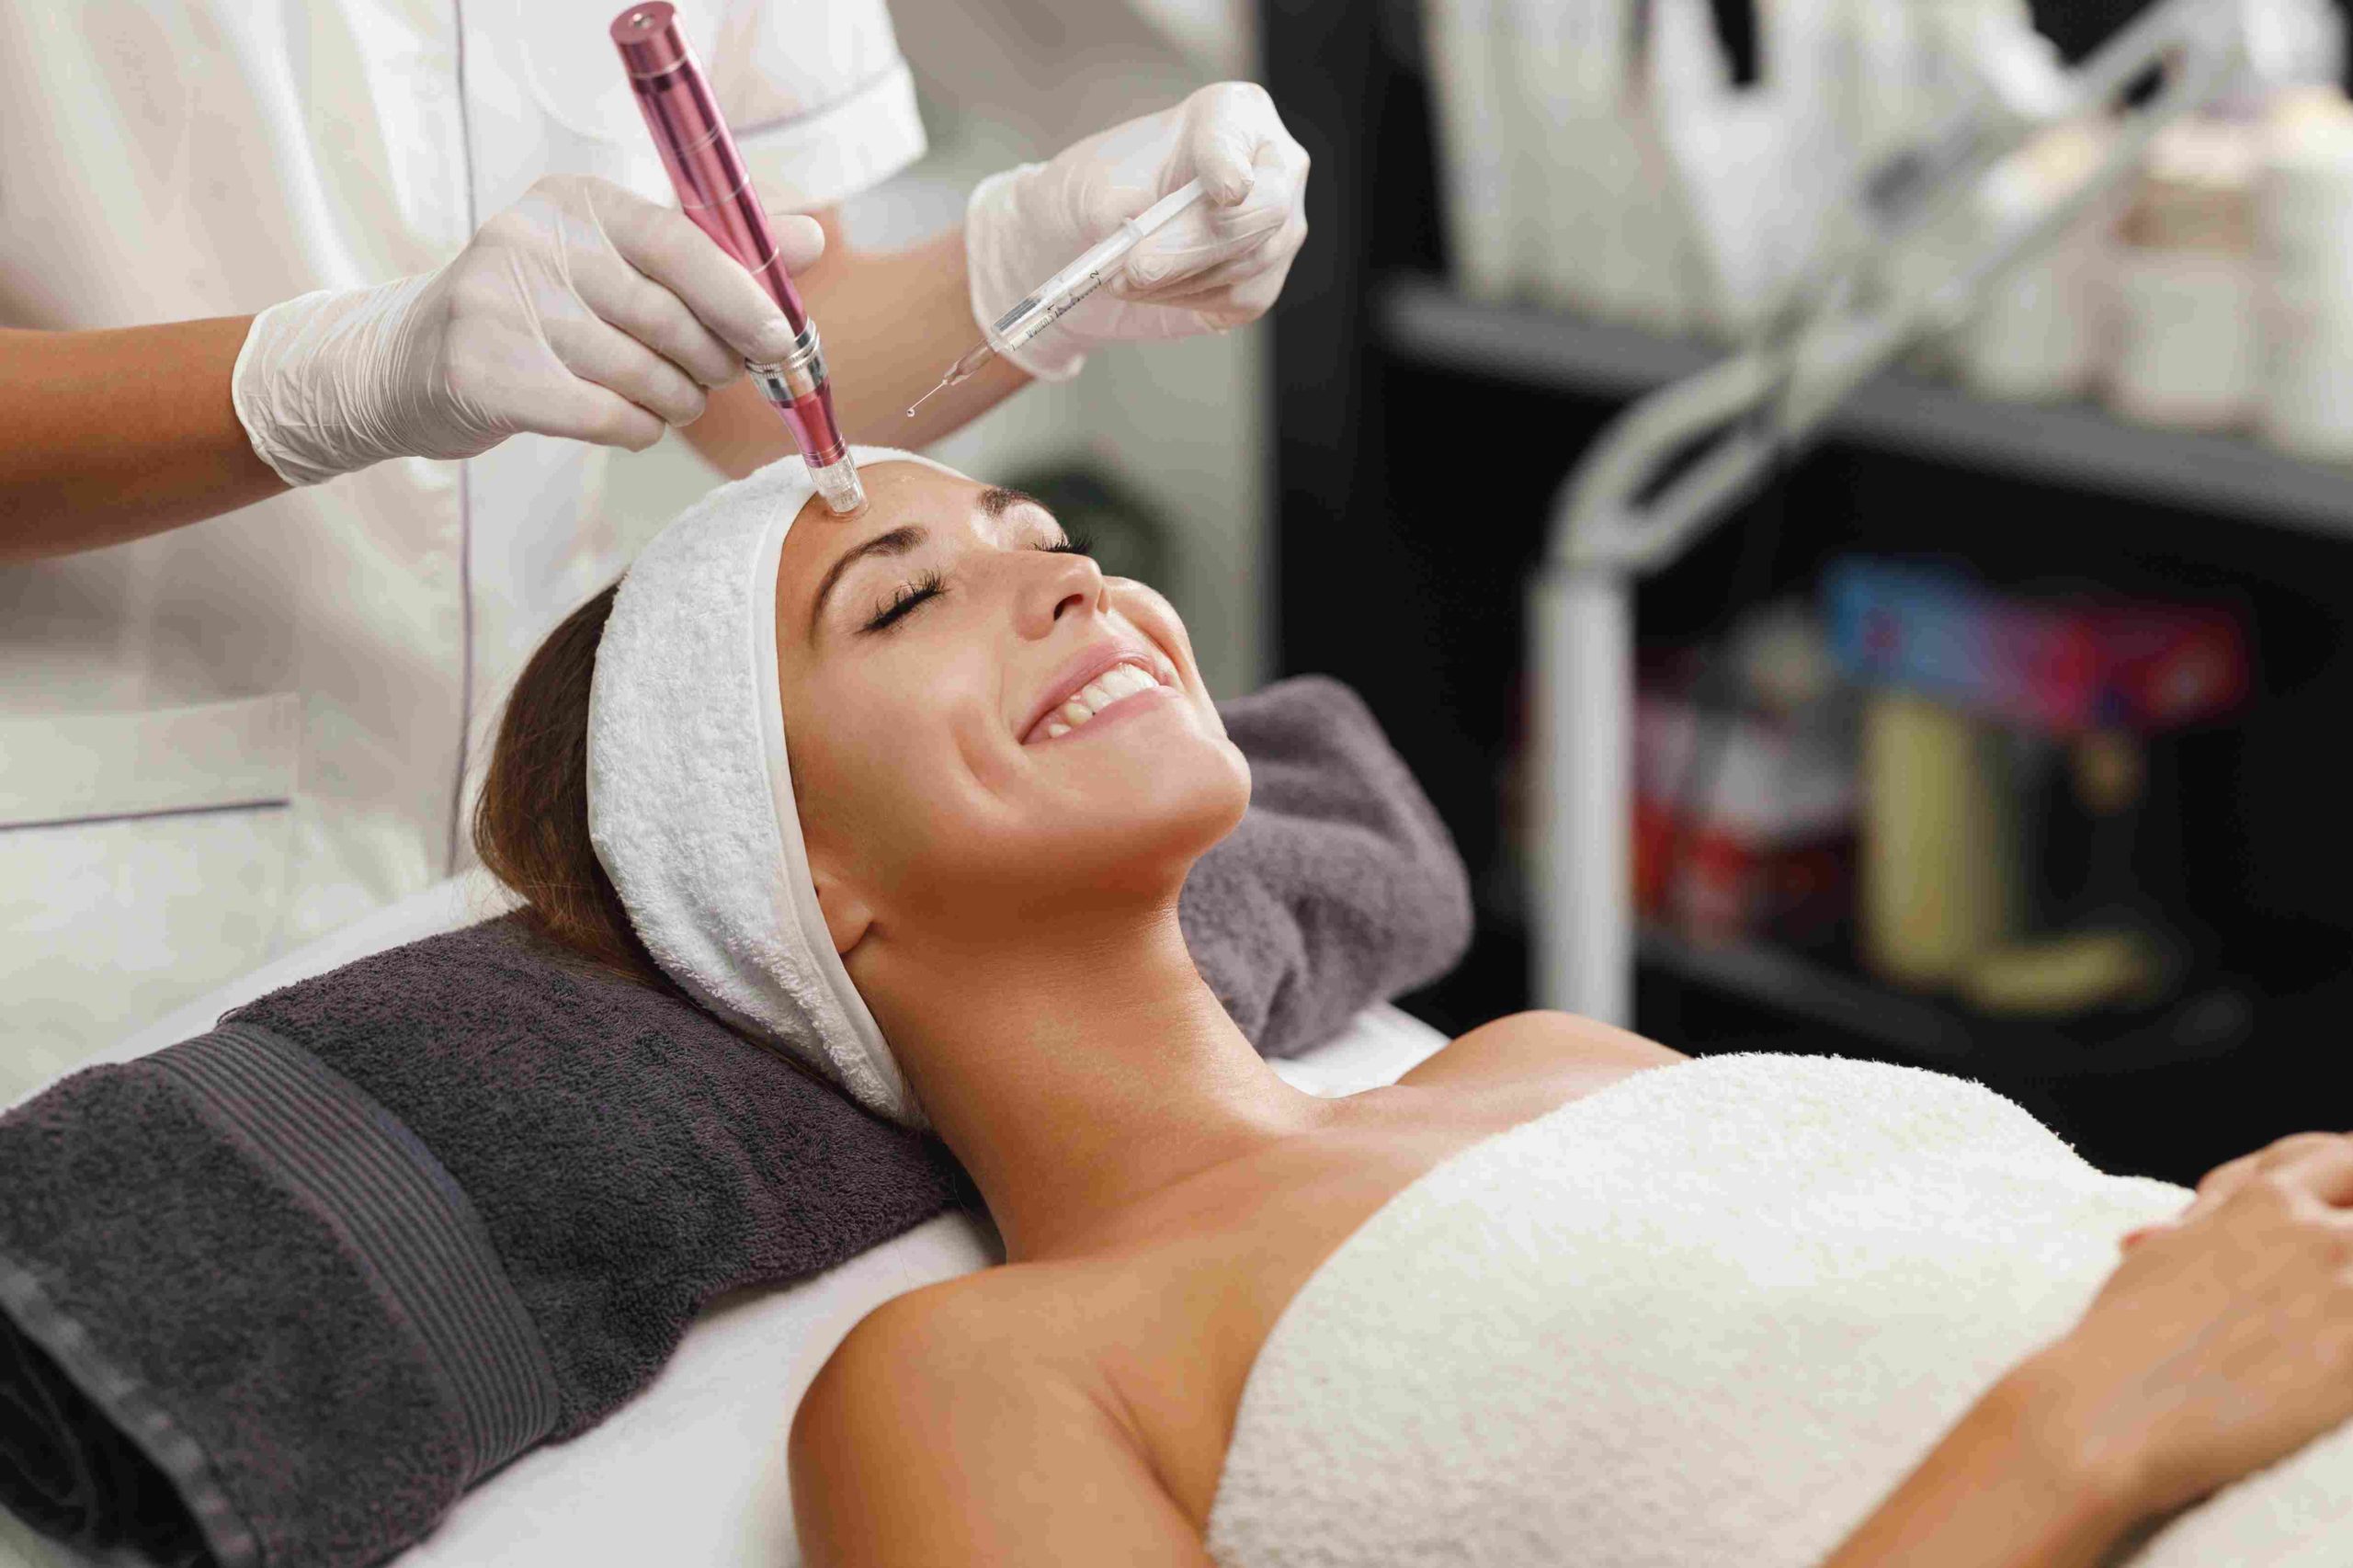 Lying Dimpled Smiling Woman Getting RF Microneedling Treatment | Avail Aesthetics in Raleigh, NC